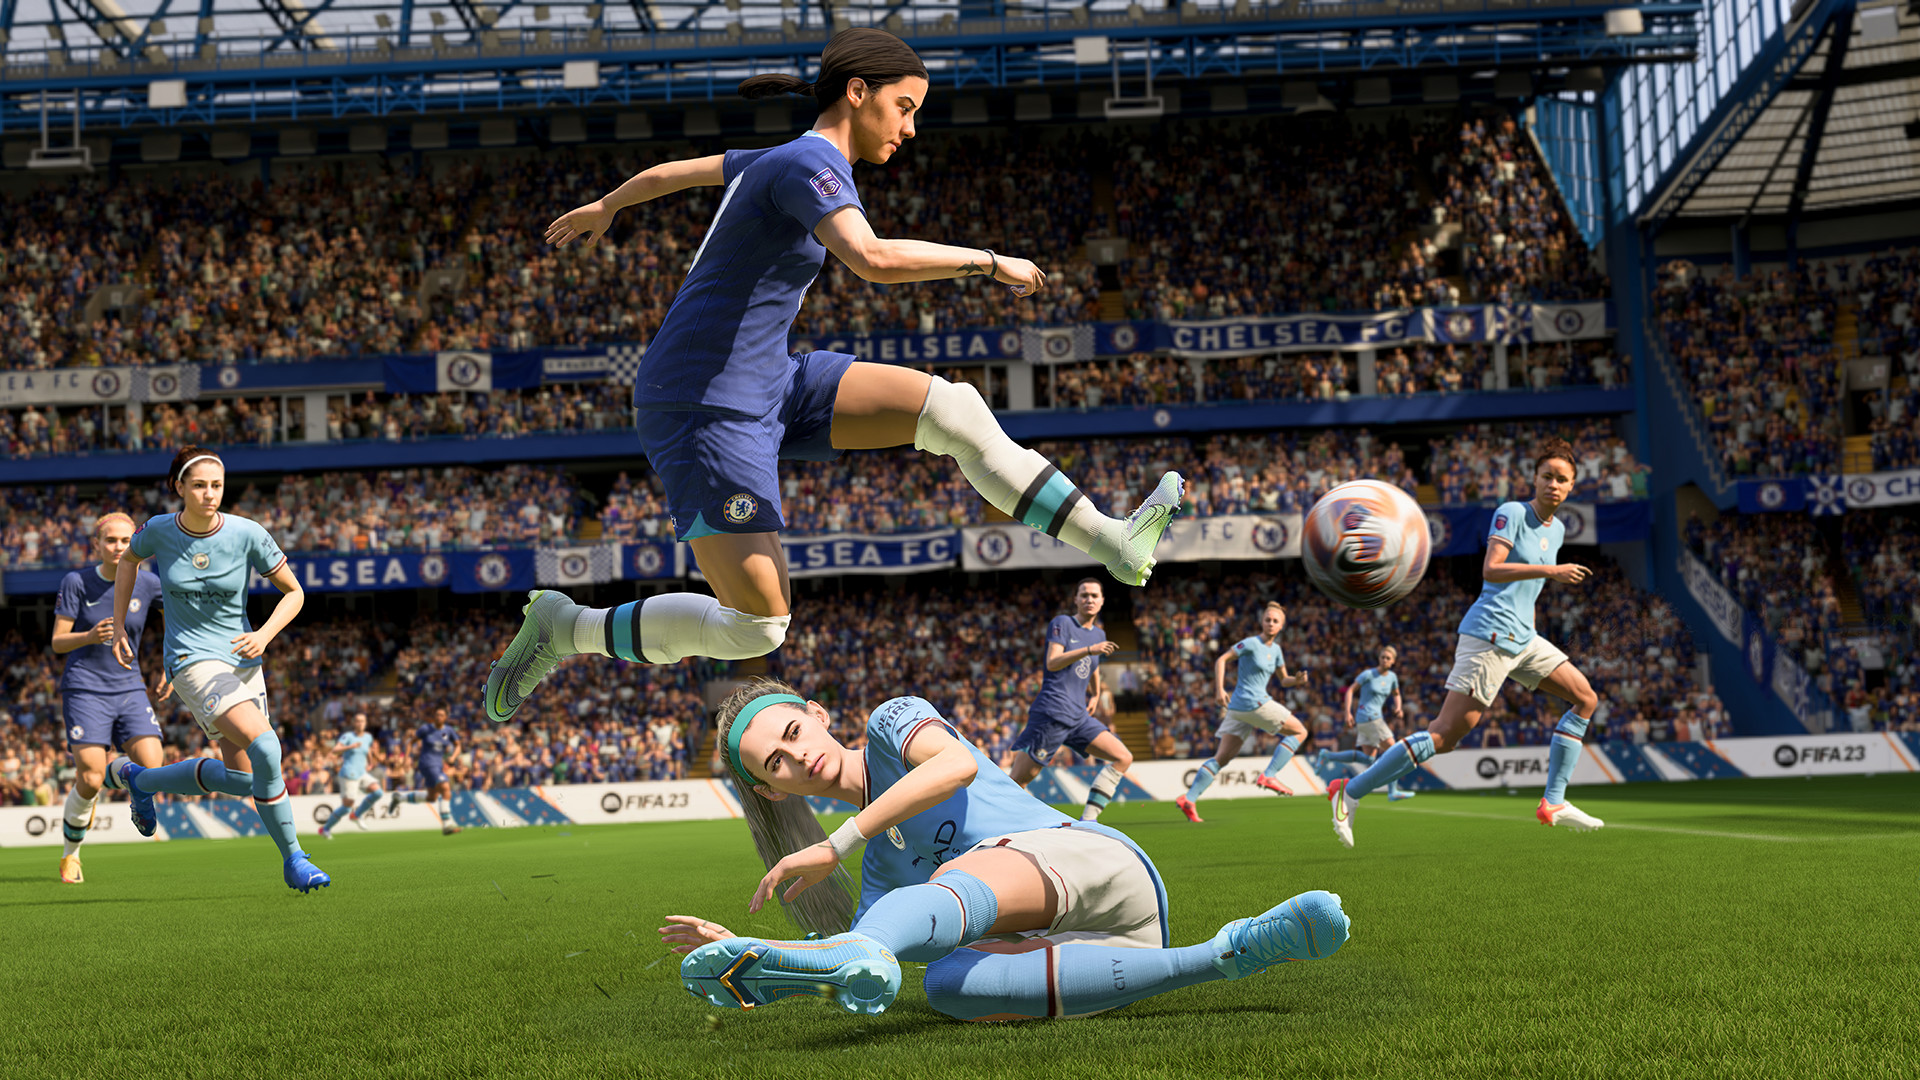 FIFA 23: How to get early access on PlayStation & Xbox